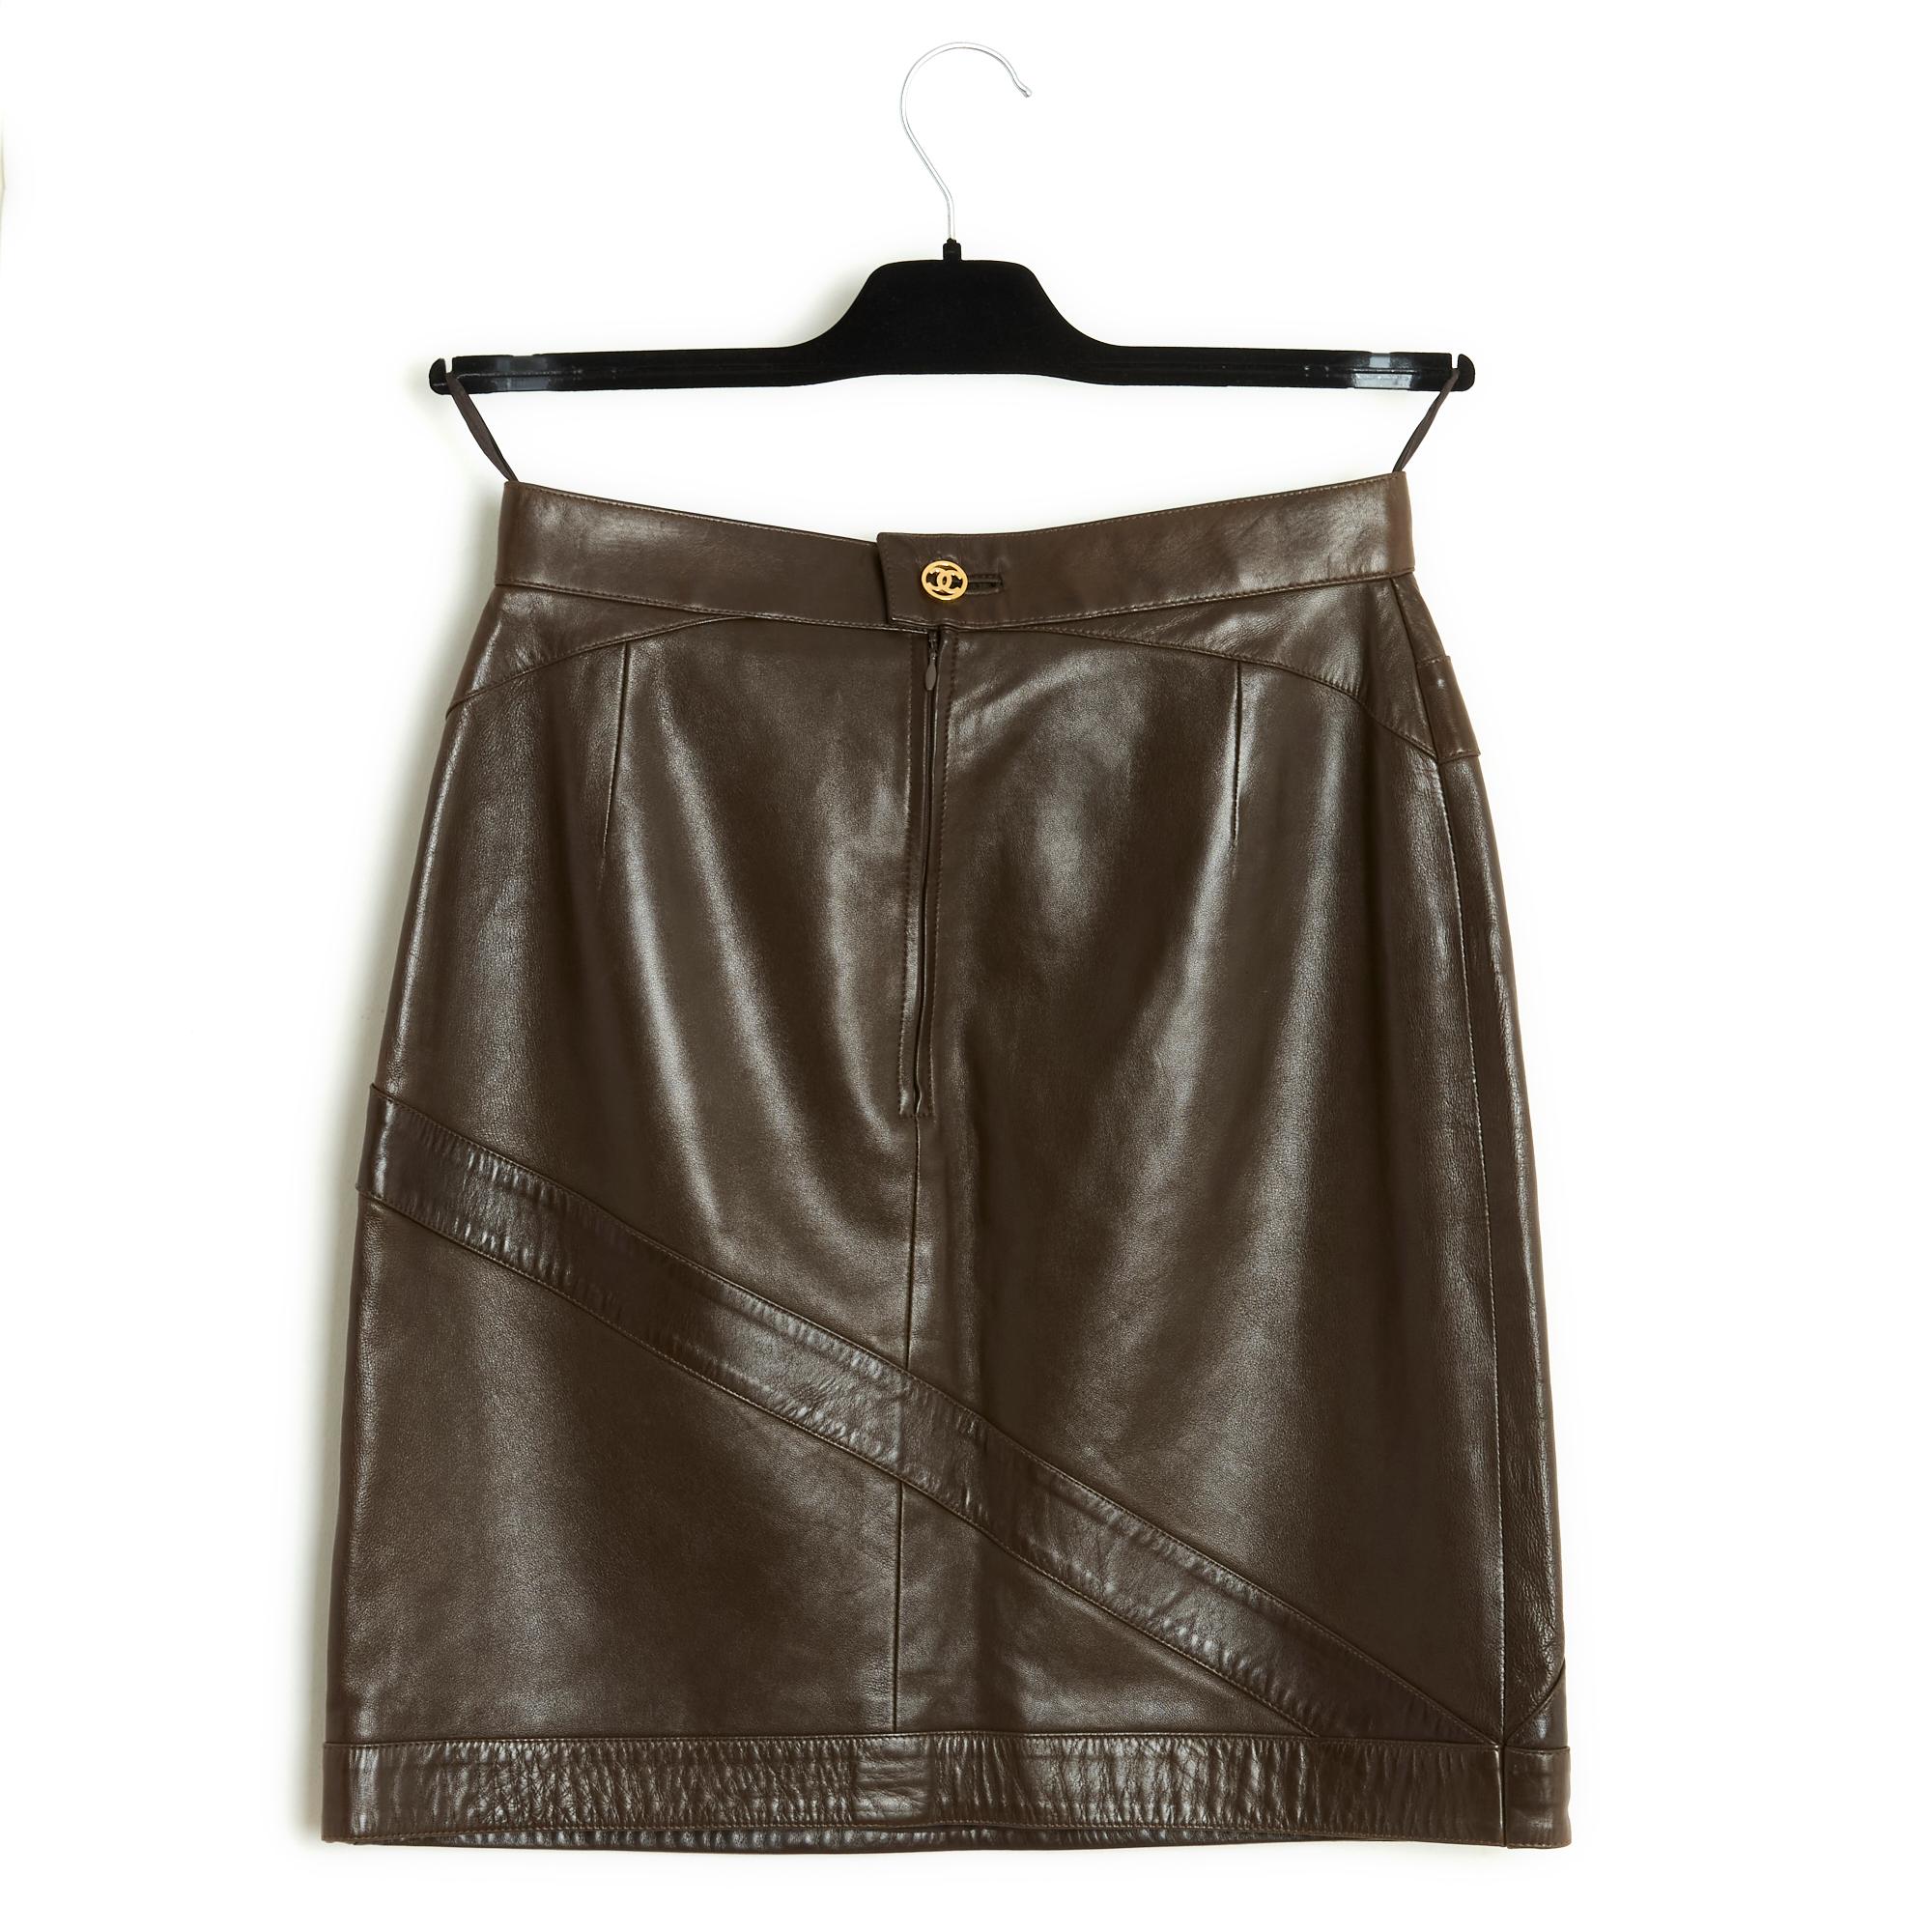 1990s Chanel Iconic Buckles Skirt FR36/38 2